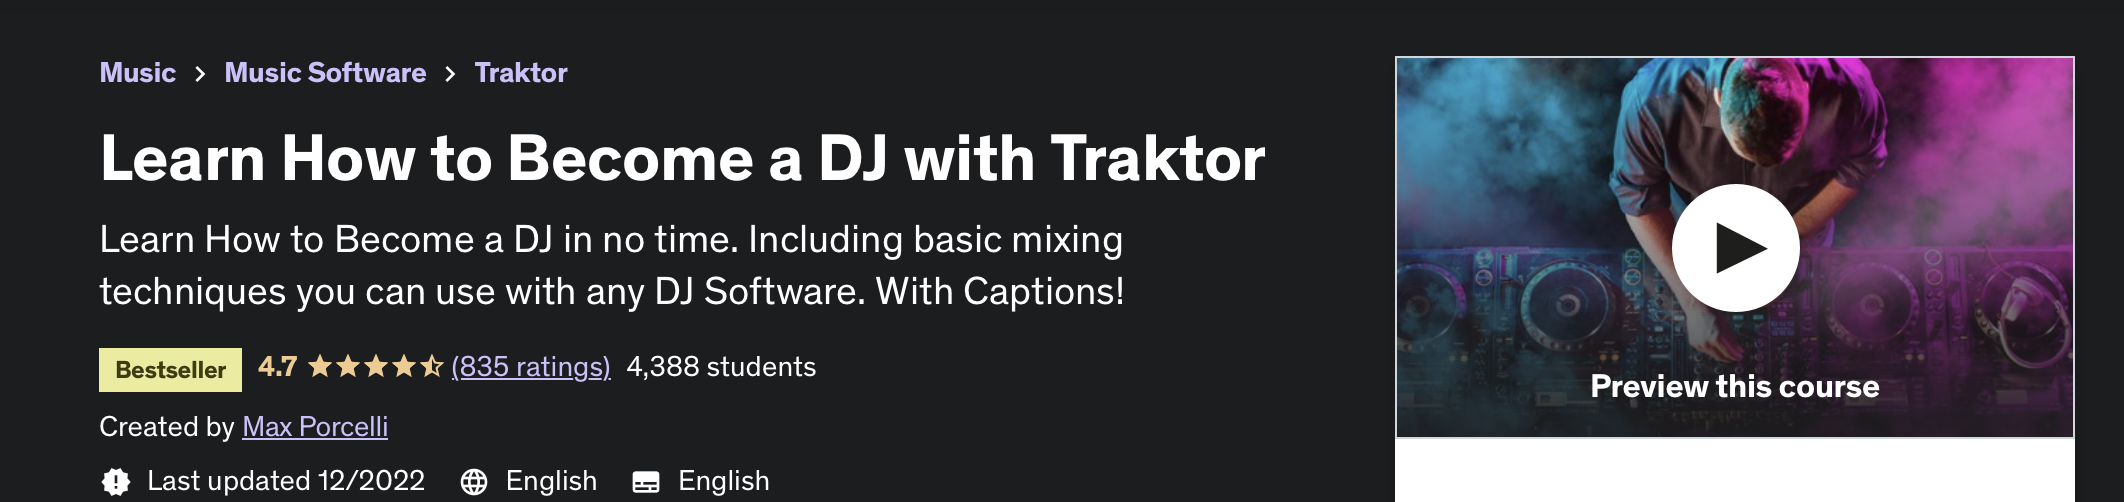 Learn How to Become a DJ with Traktor